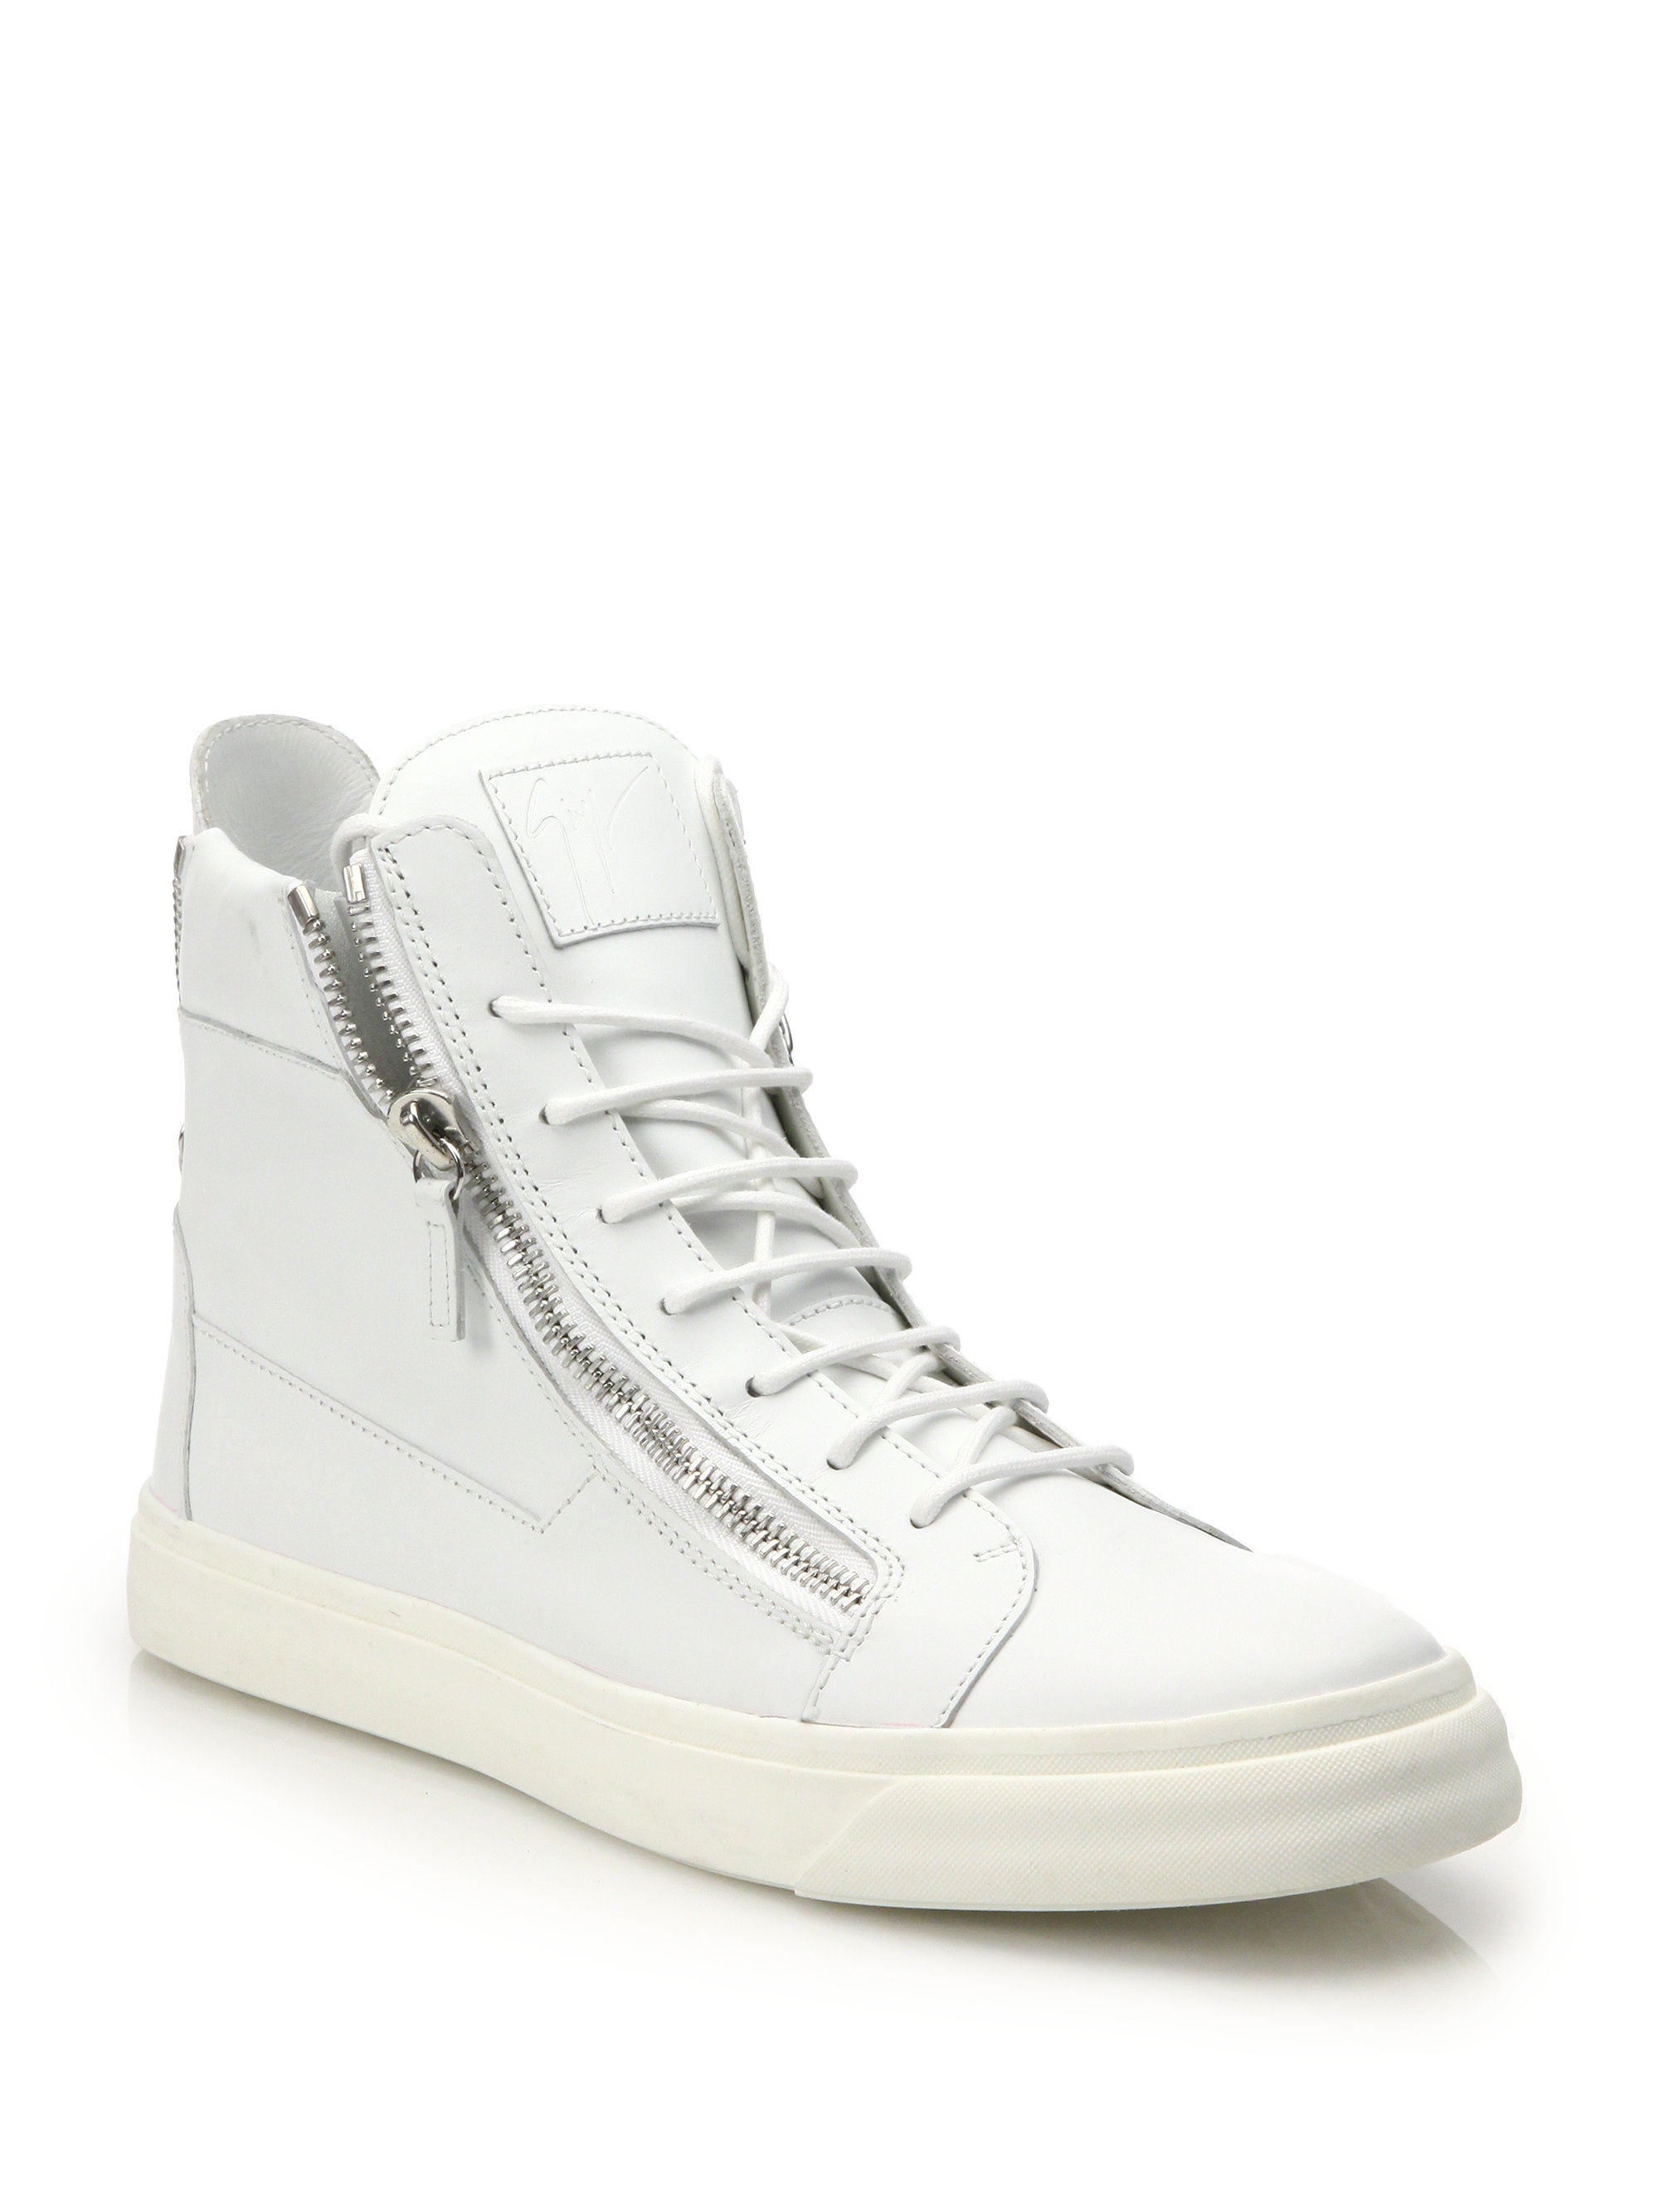 Lyst - Giuseppe Zanotti Double-zip Leather High-top Sneakers in White